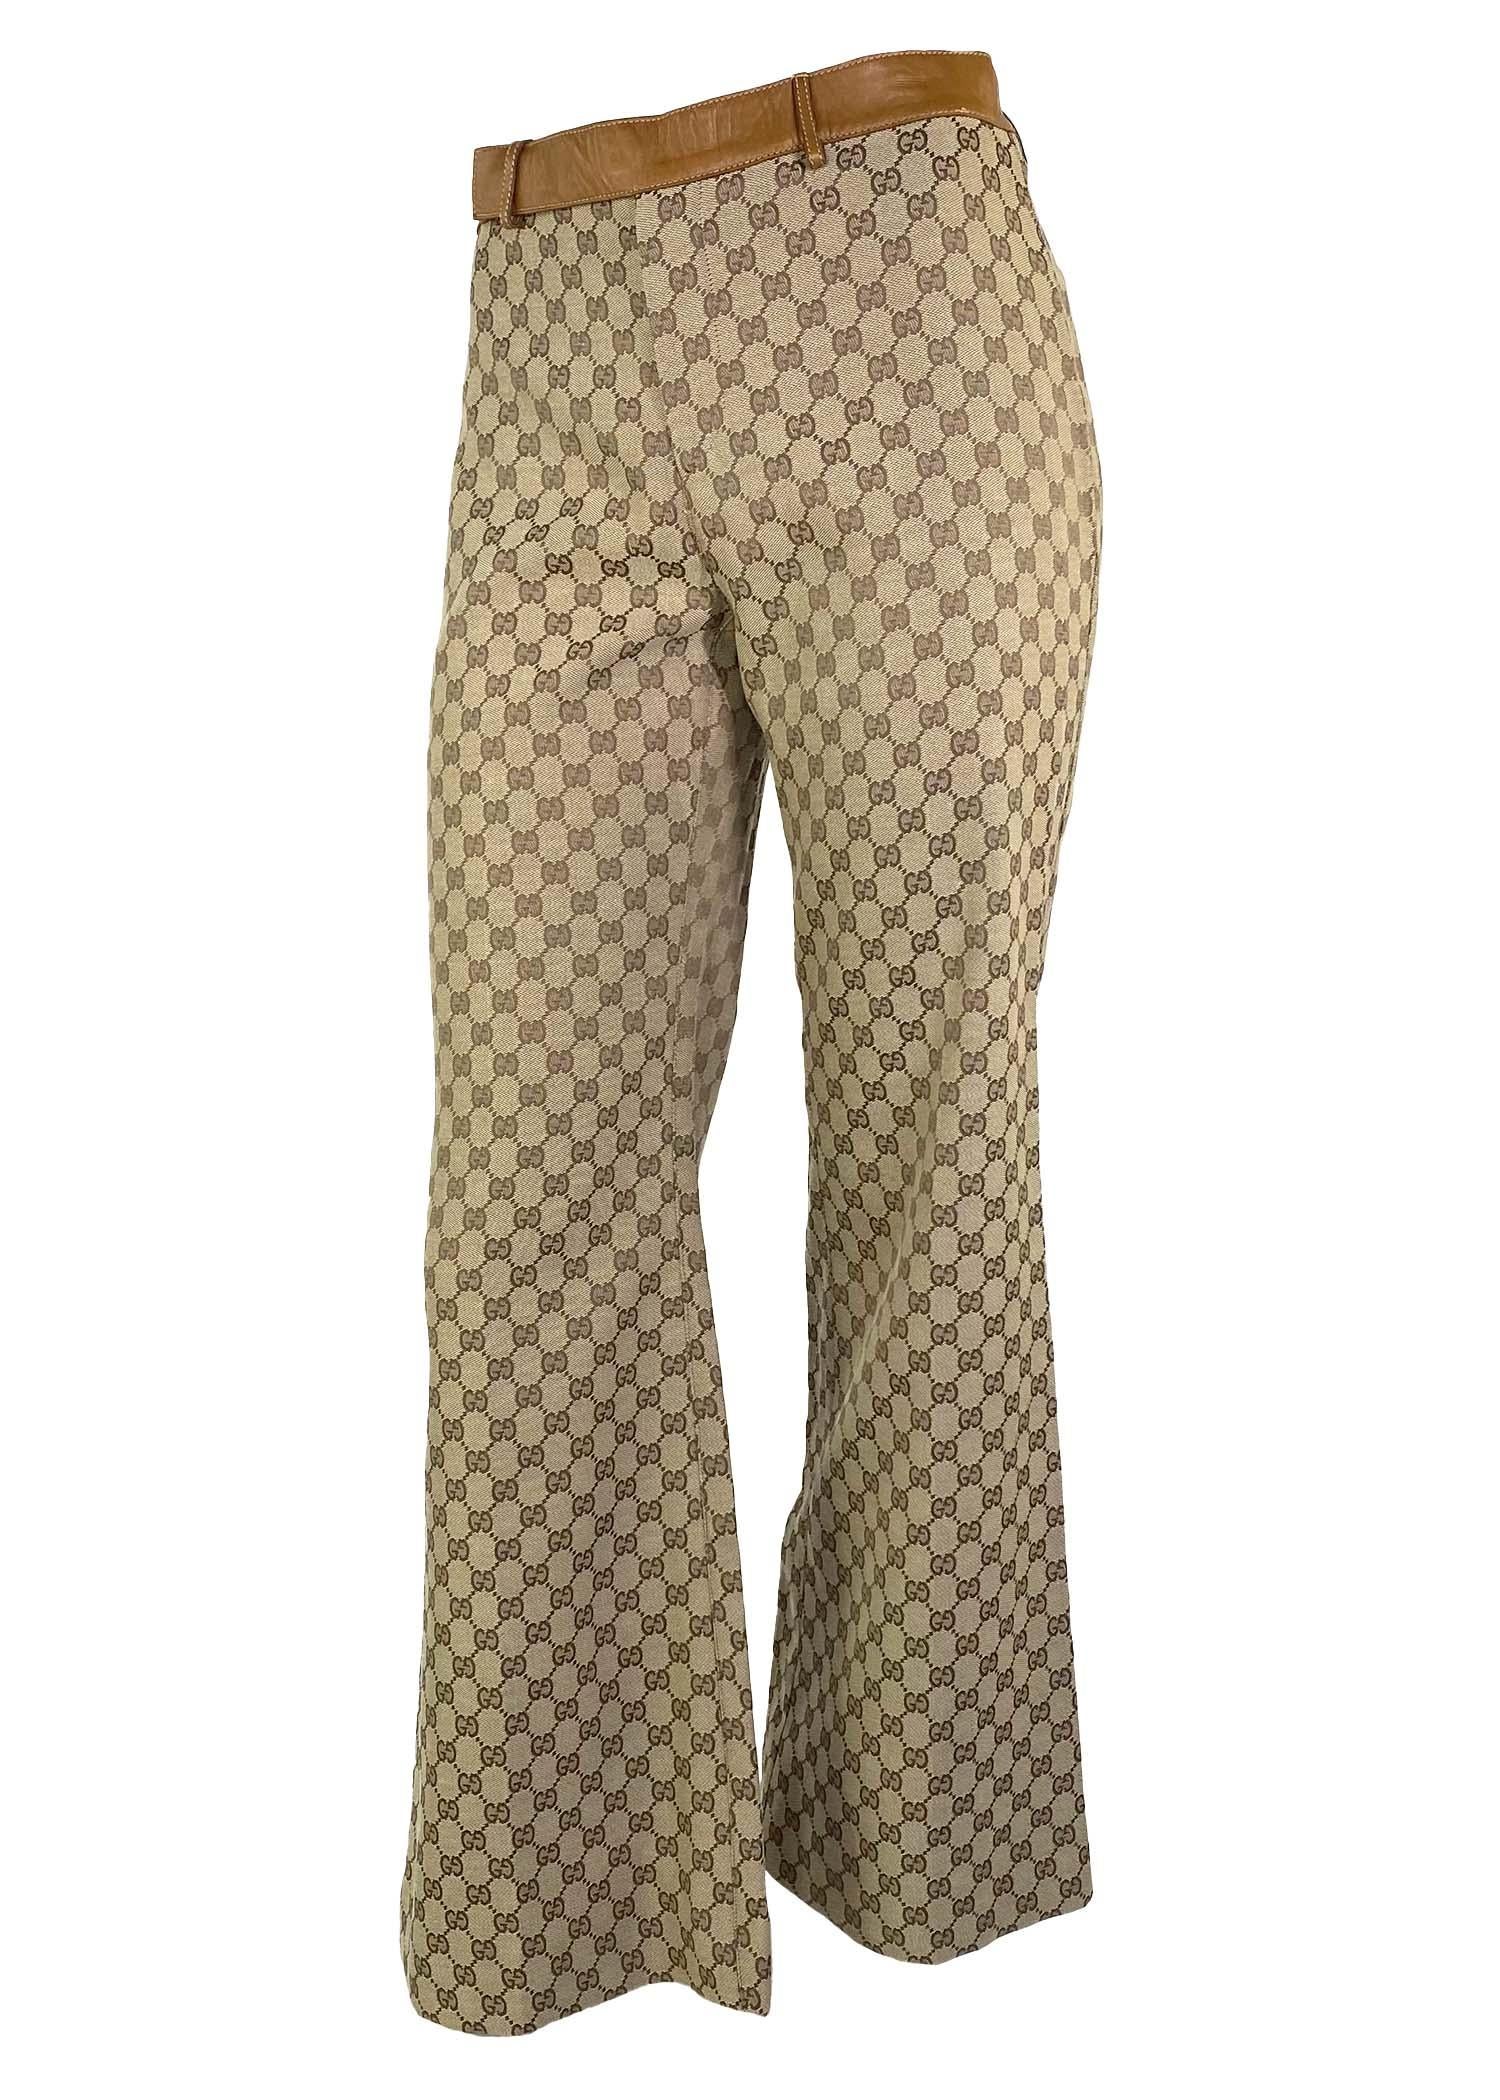 Presenting an iconic pair of 'GG' monogram Gucci canvas pants, designed by Tom Ford. This pair of wide leg pants, from the Fall/Winter 2000 collection, are constructed entirely of the classic 'GG' monogram canvas with saddle leather finishes. While